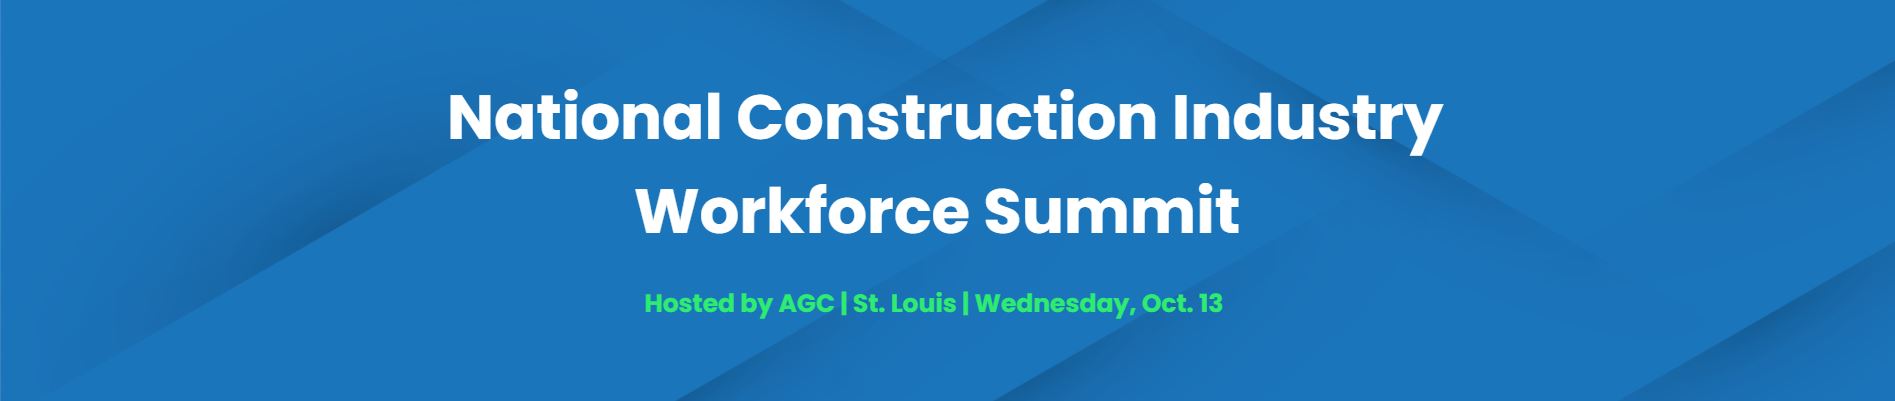 National Construction Industry Workforce Summit  